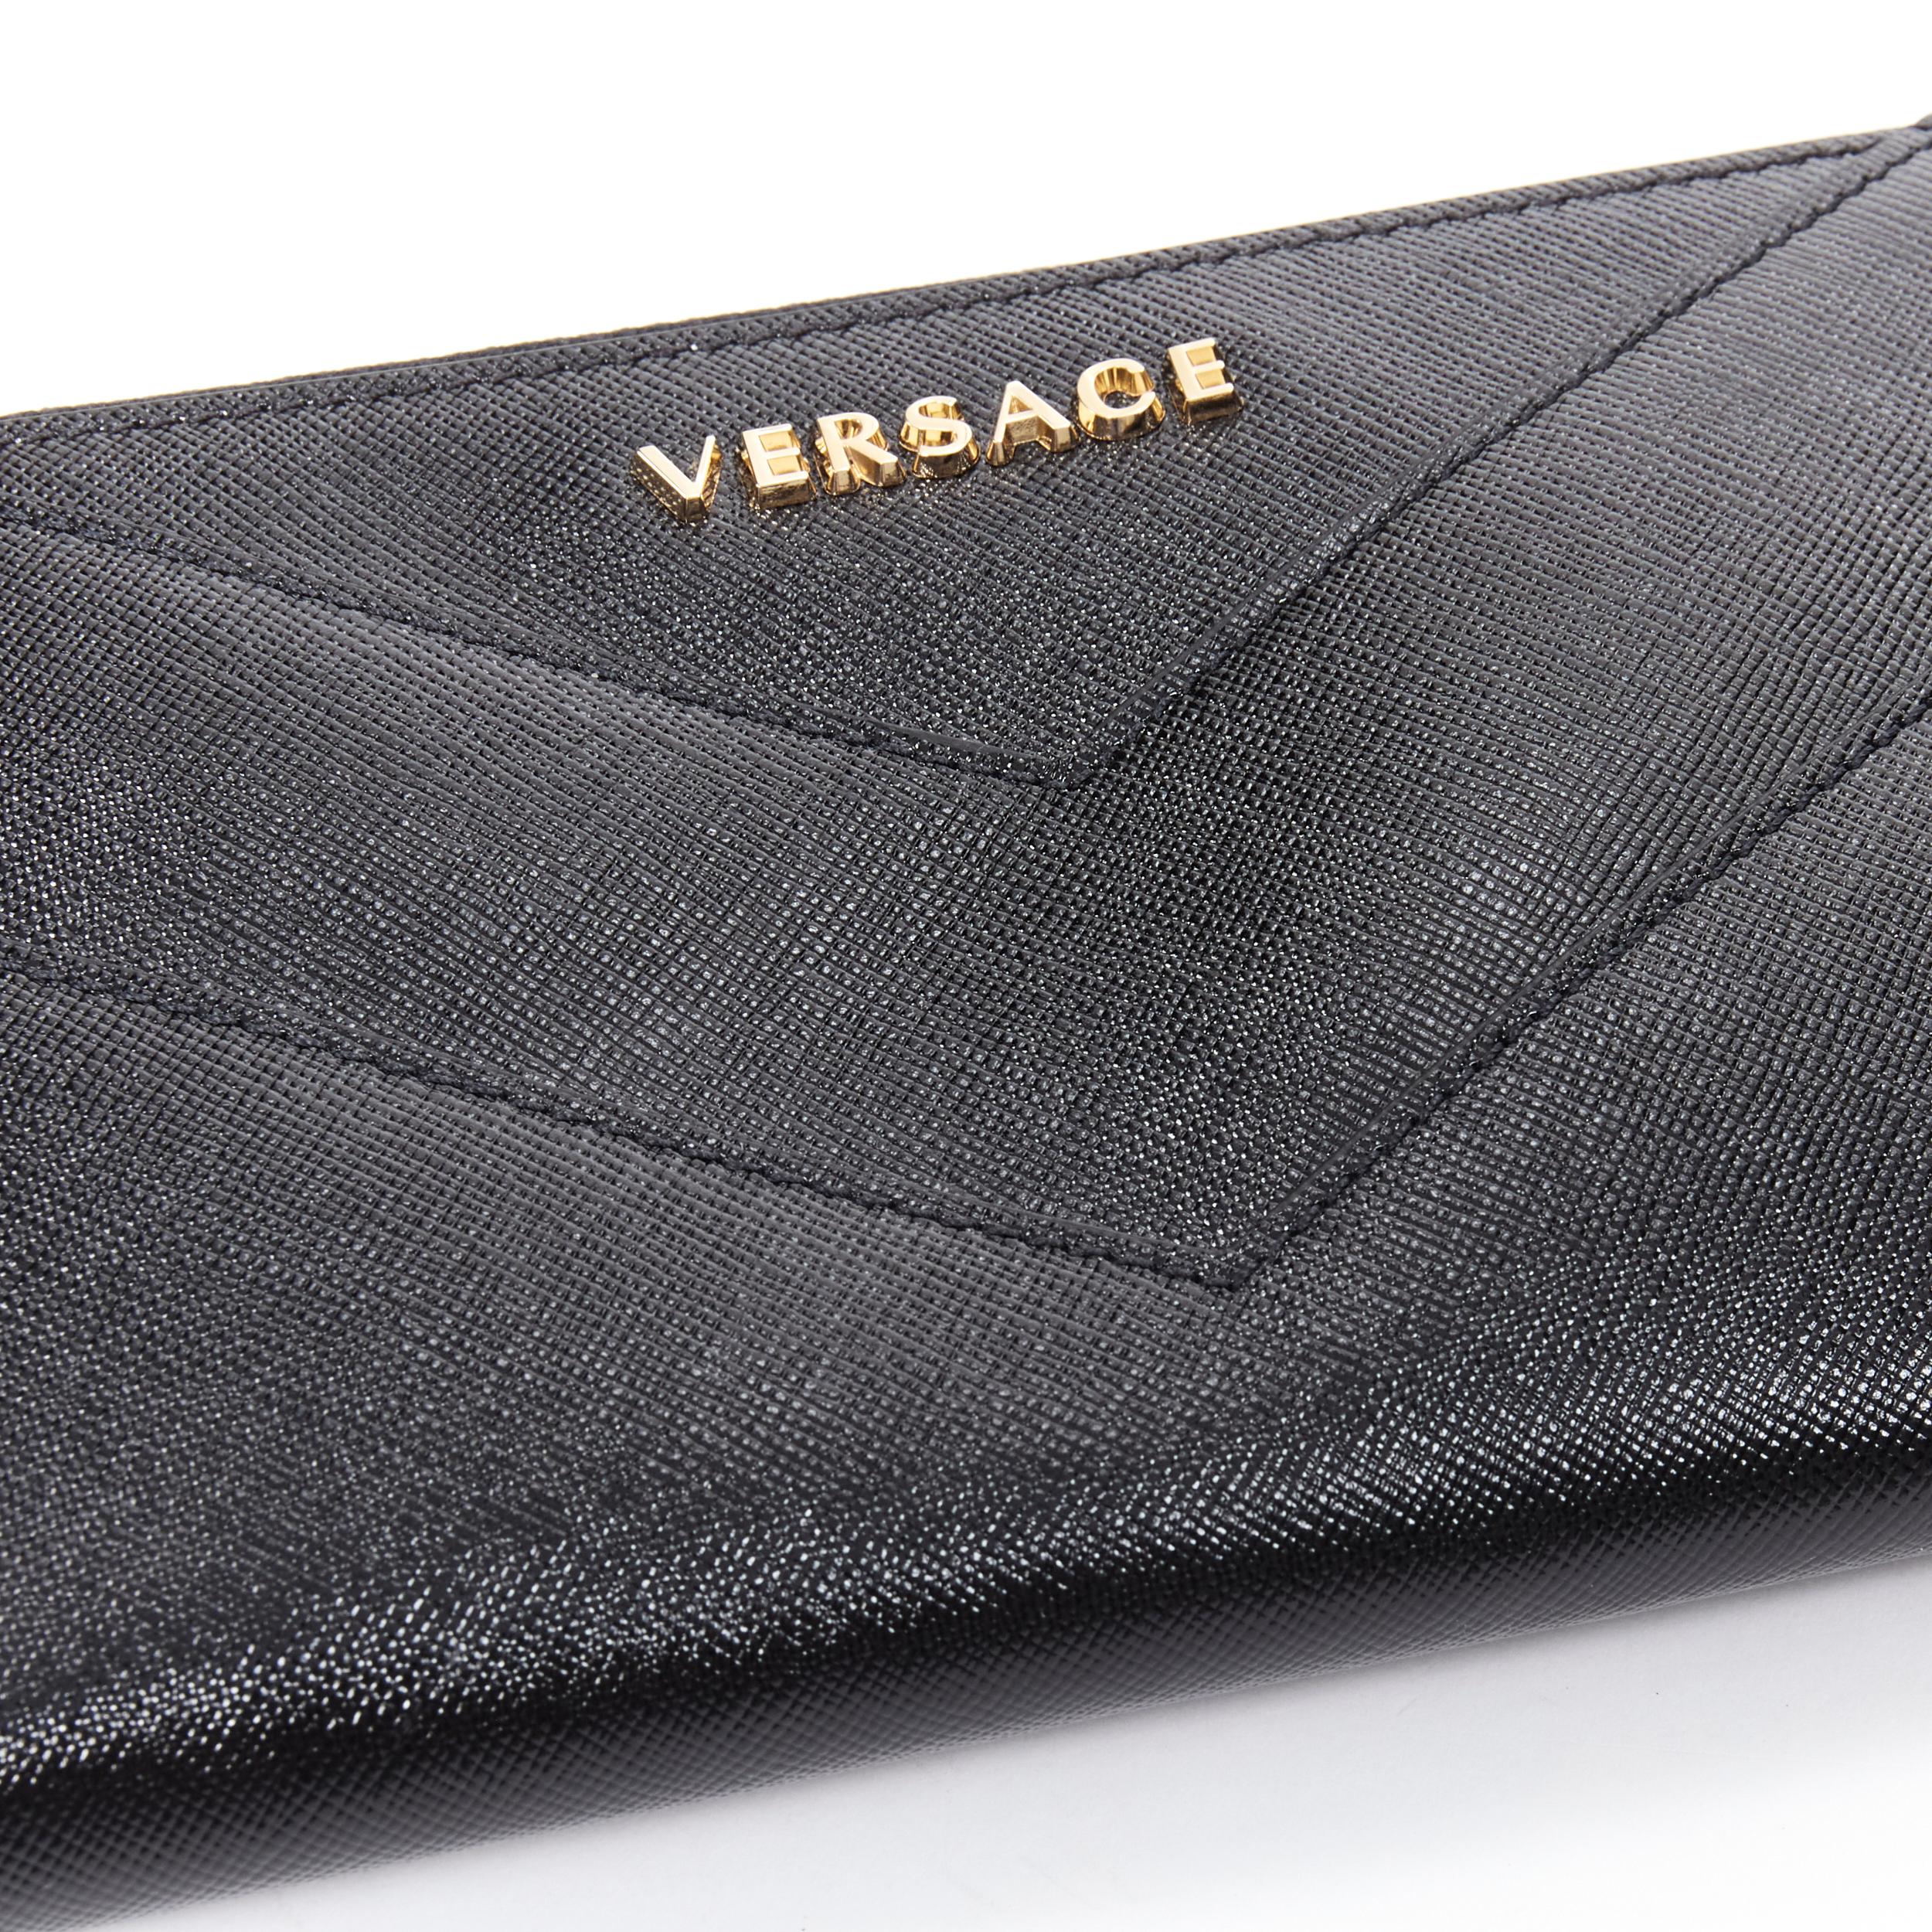 Black new VERSACE black saffiano leather gold logo V stitch continental long wallet For Sale